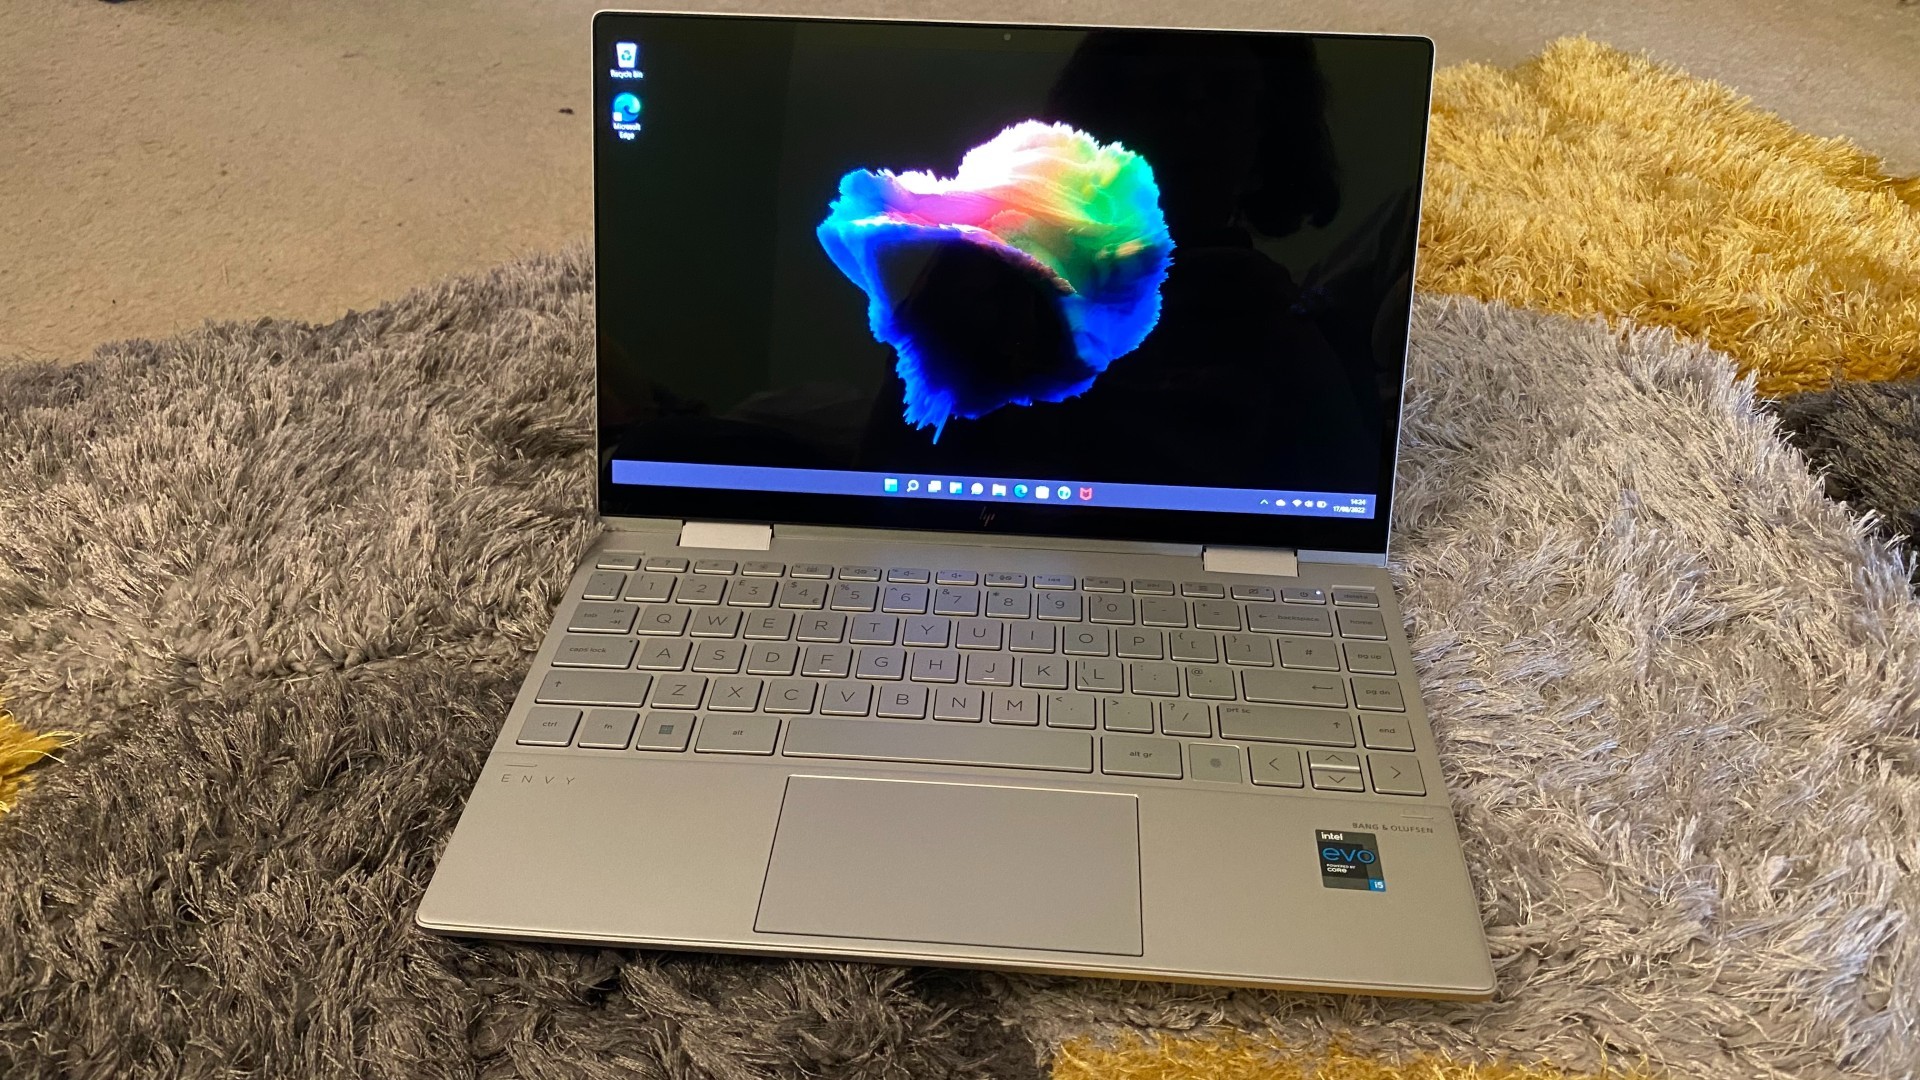 HP Envy x360 13 (13-ay0000) review - a great little machine for